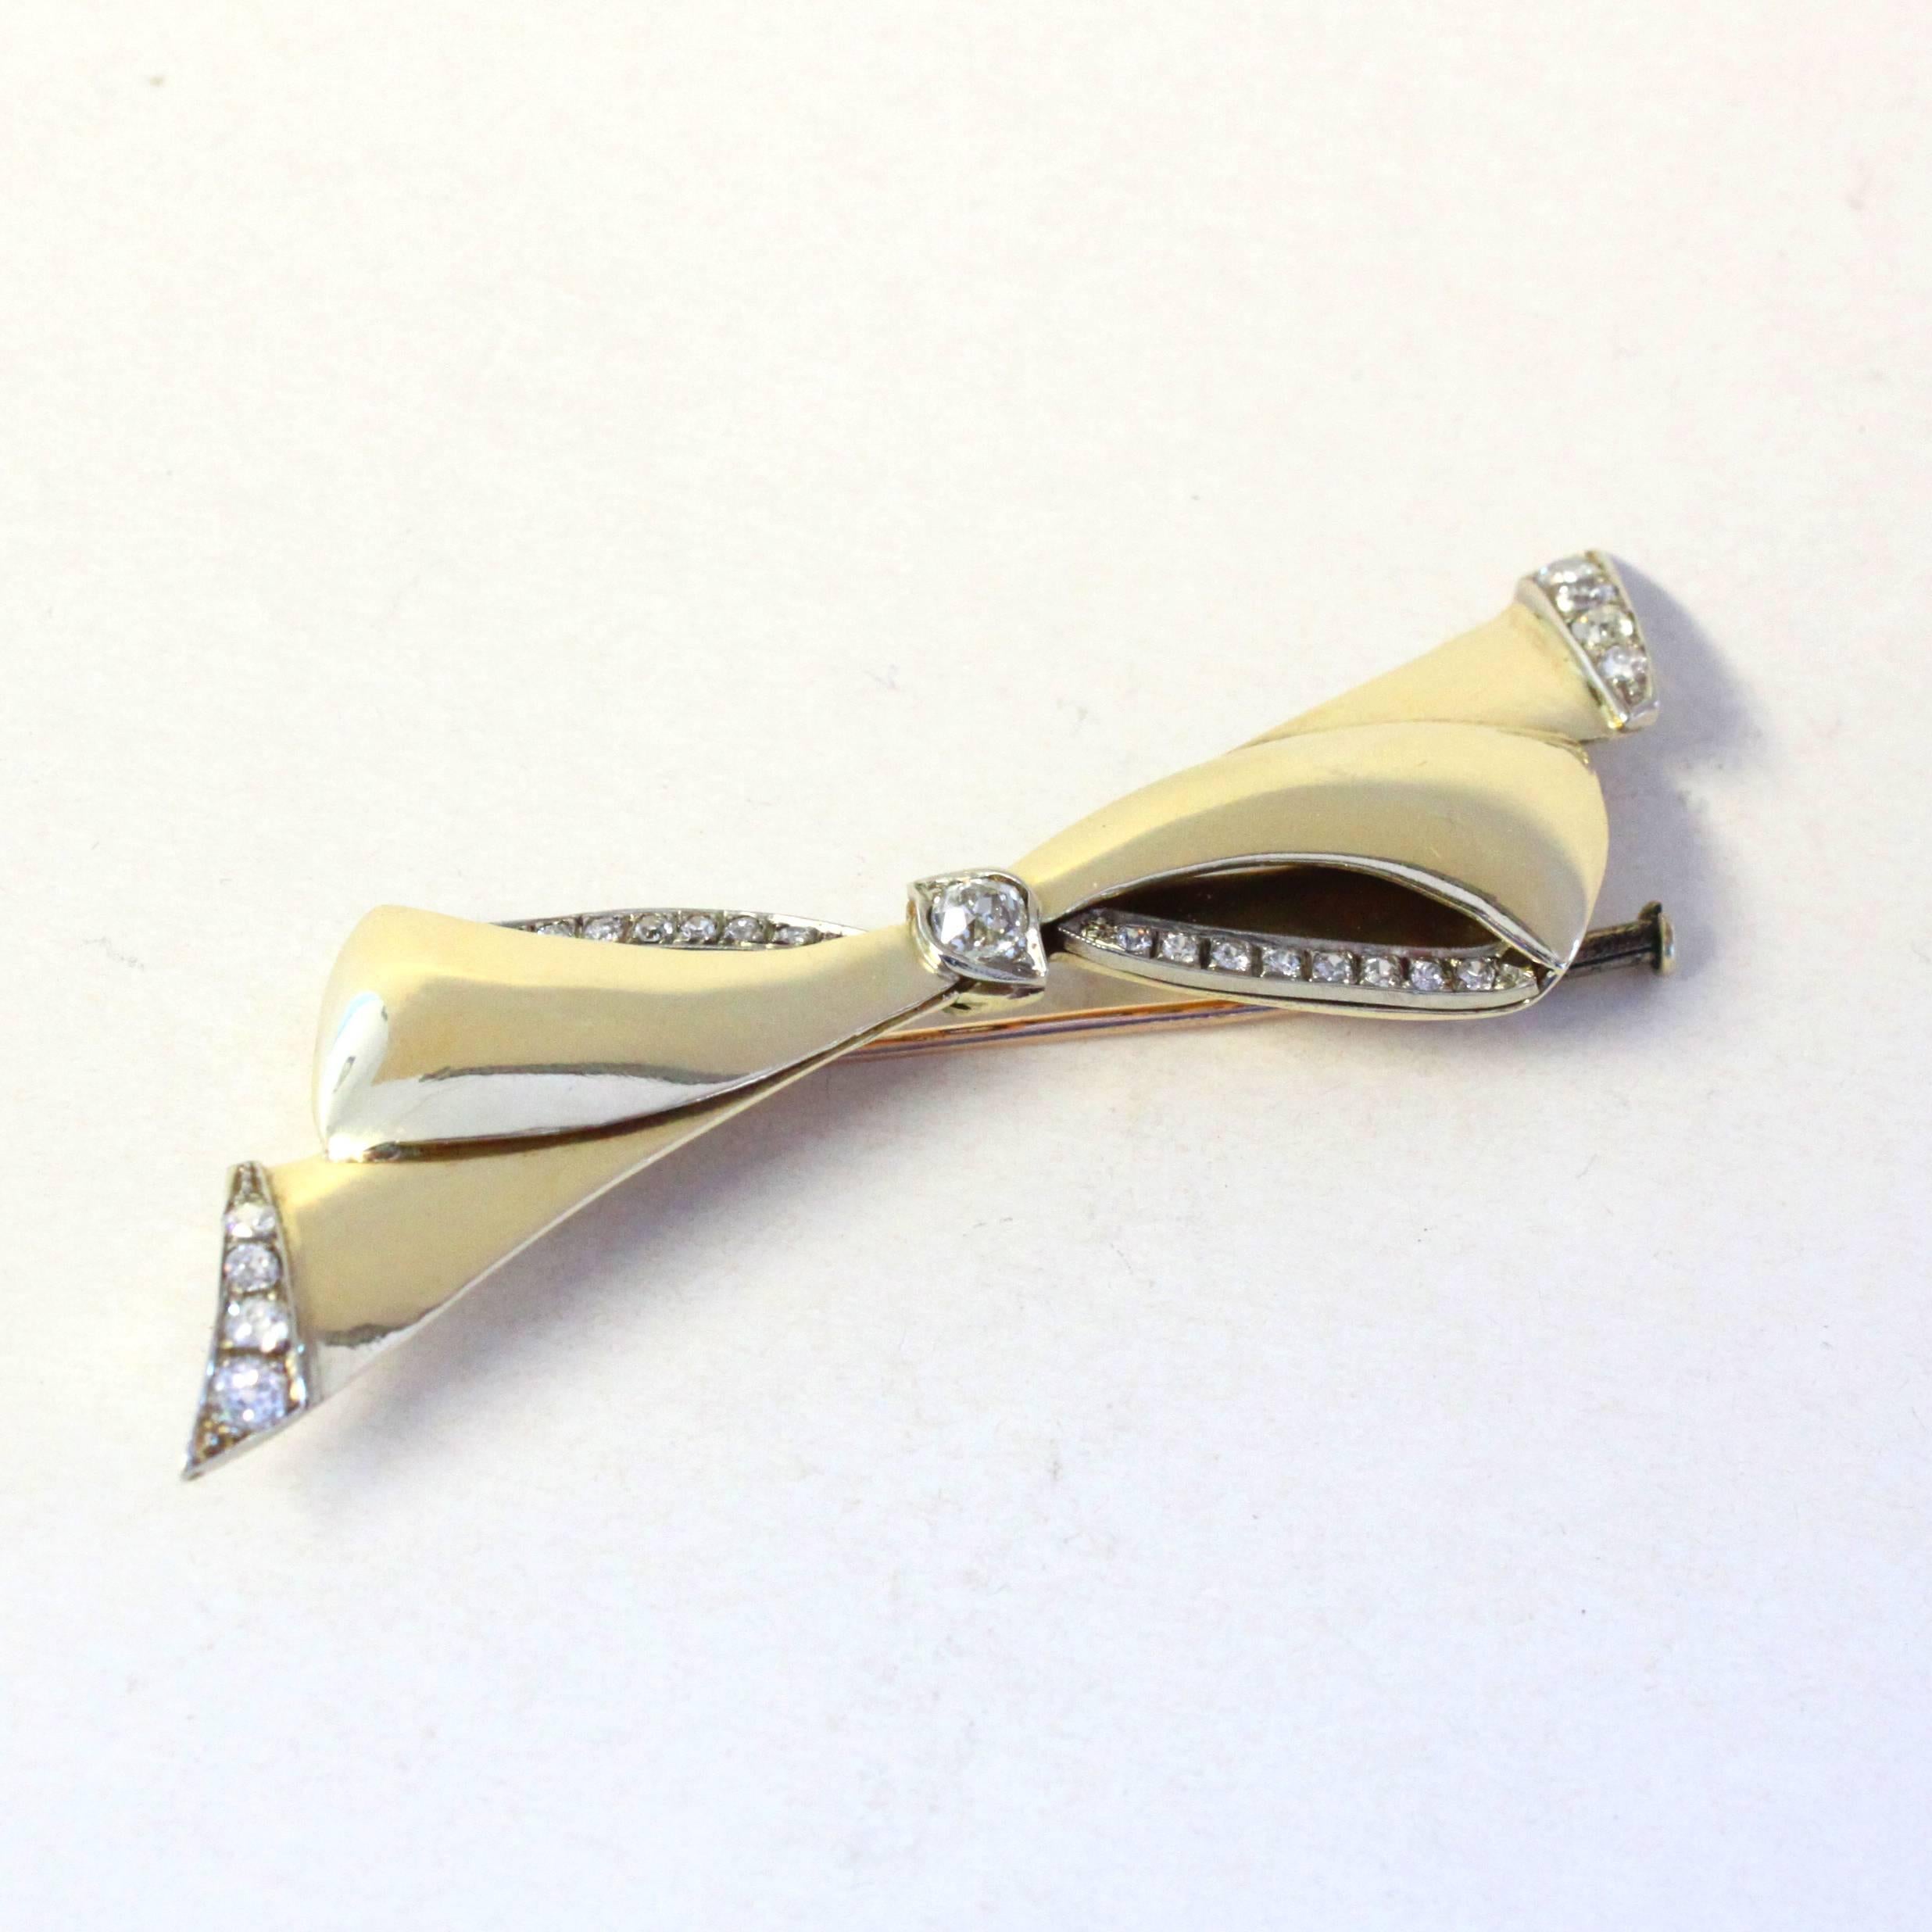 A beautiful Cartier Bow Brooch, ca. 1940s.

The bow is studded with old-cut diamonds of circa 2.5 carats and is made in 18k yellow gold.

Signed Cartier Paris, French marks.